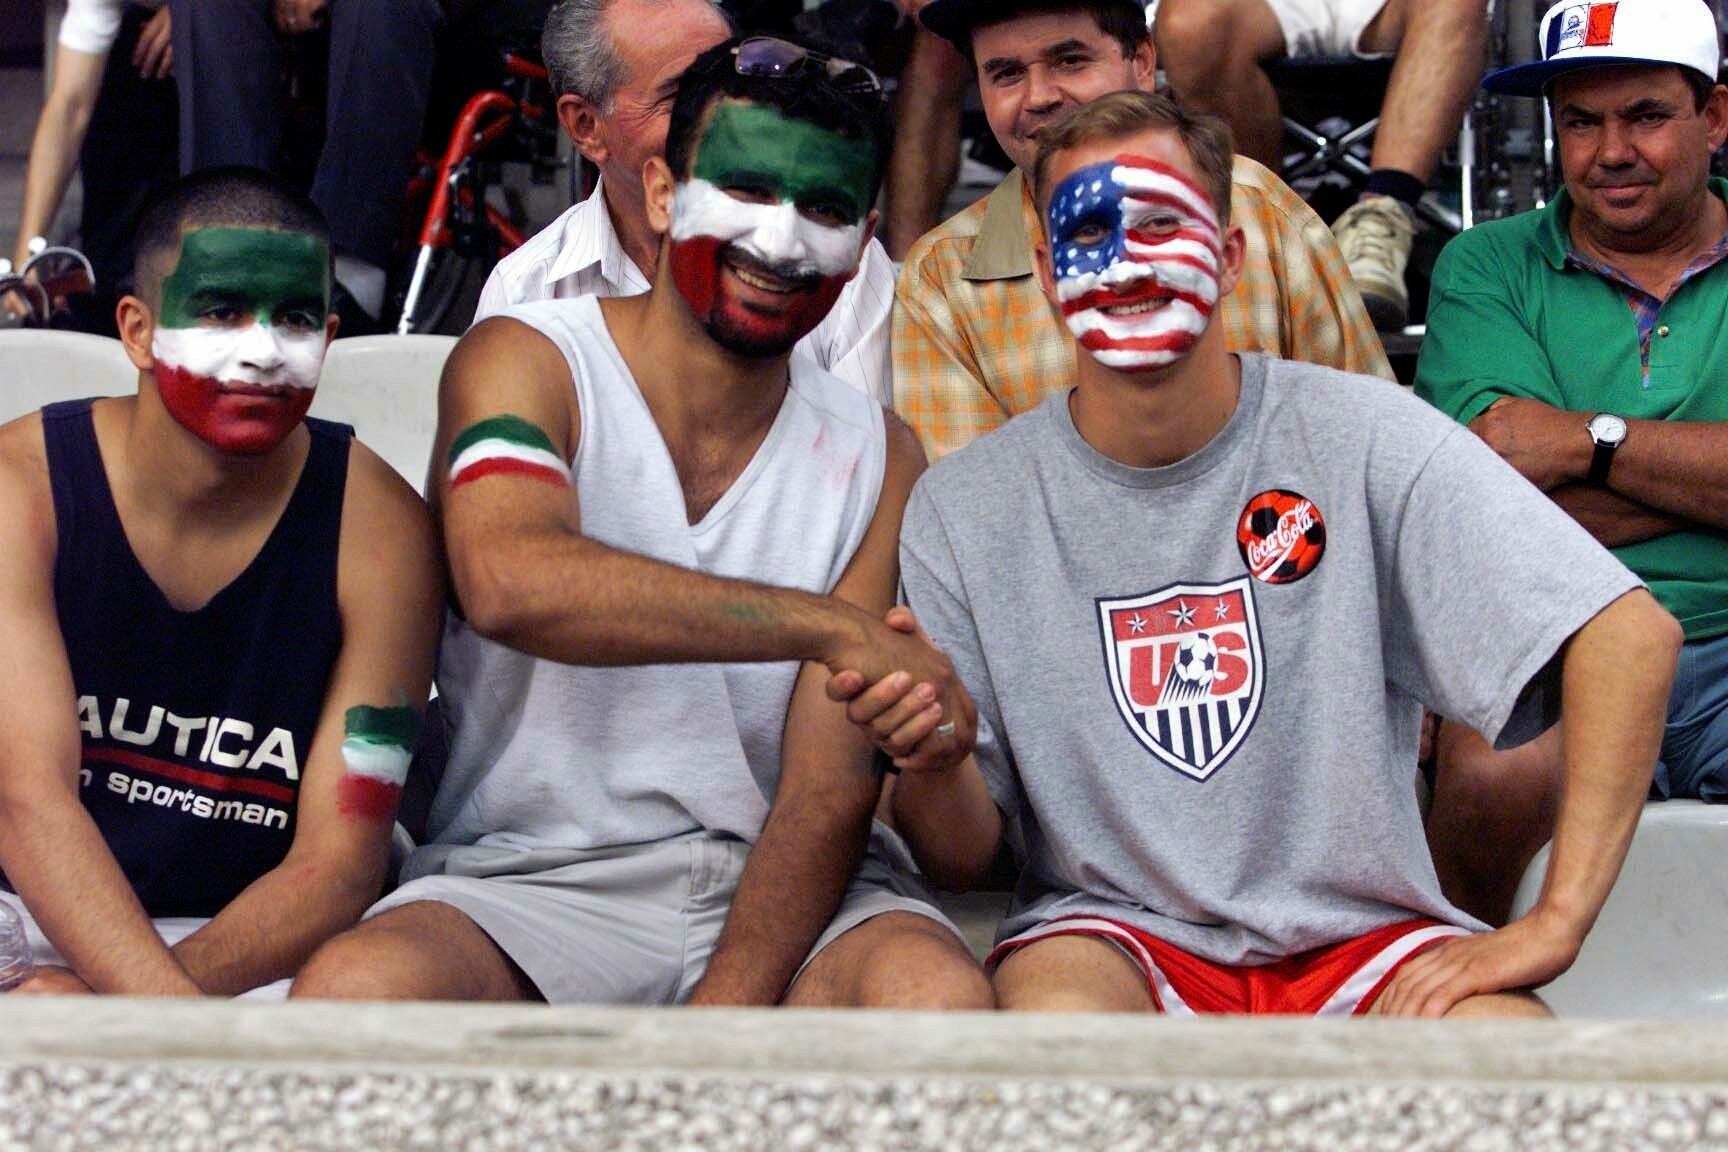 Good relations between Iran and USMNT fans in 1998